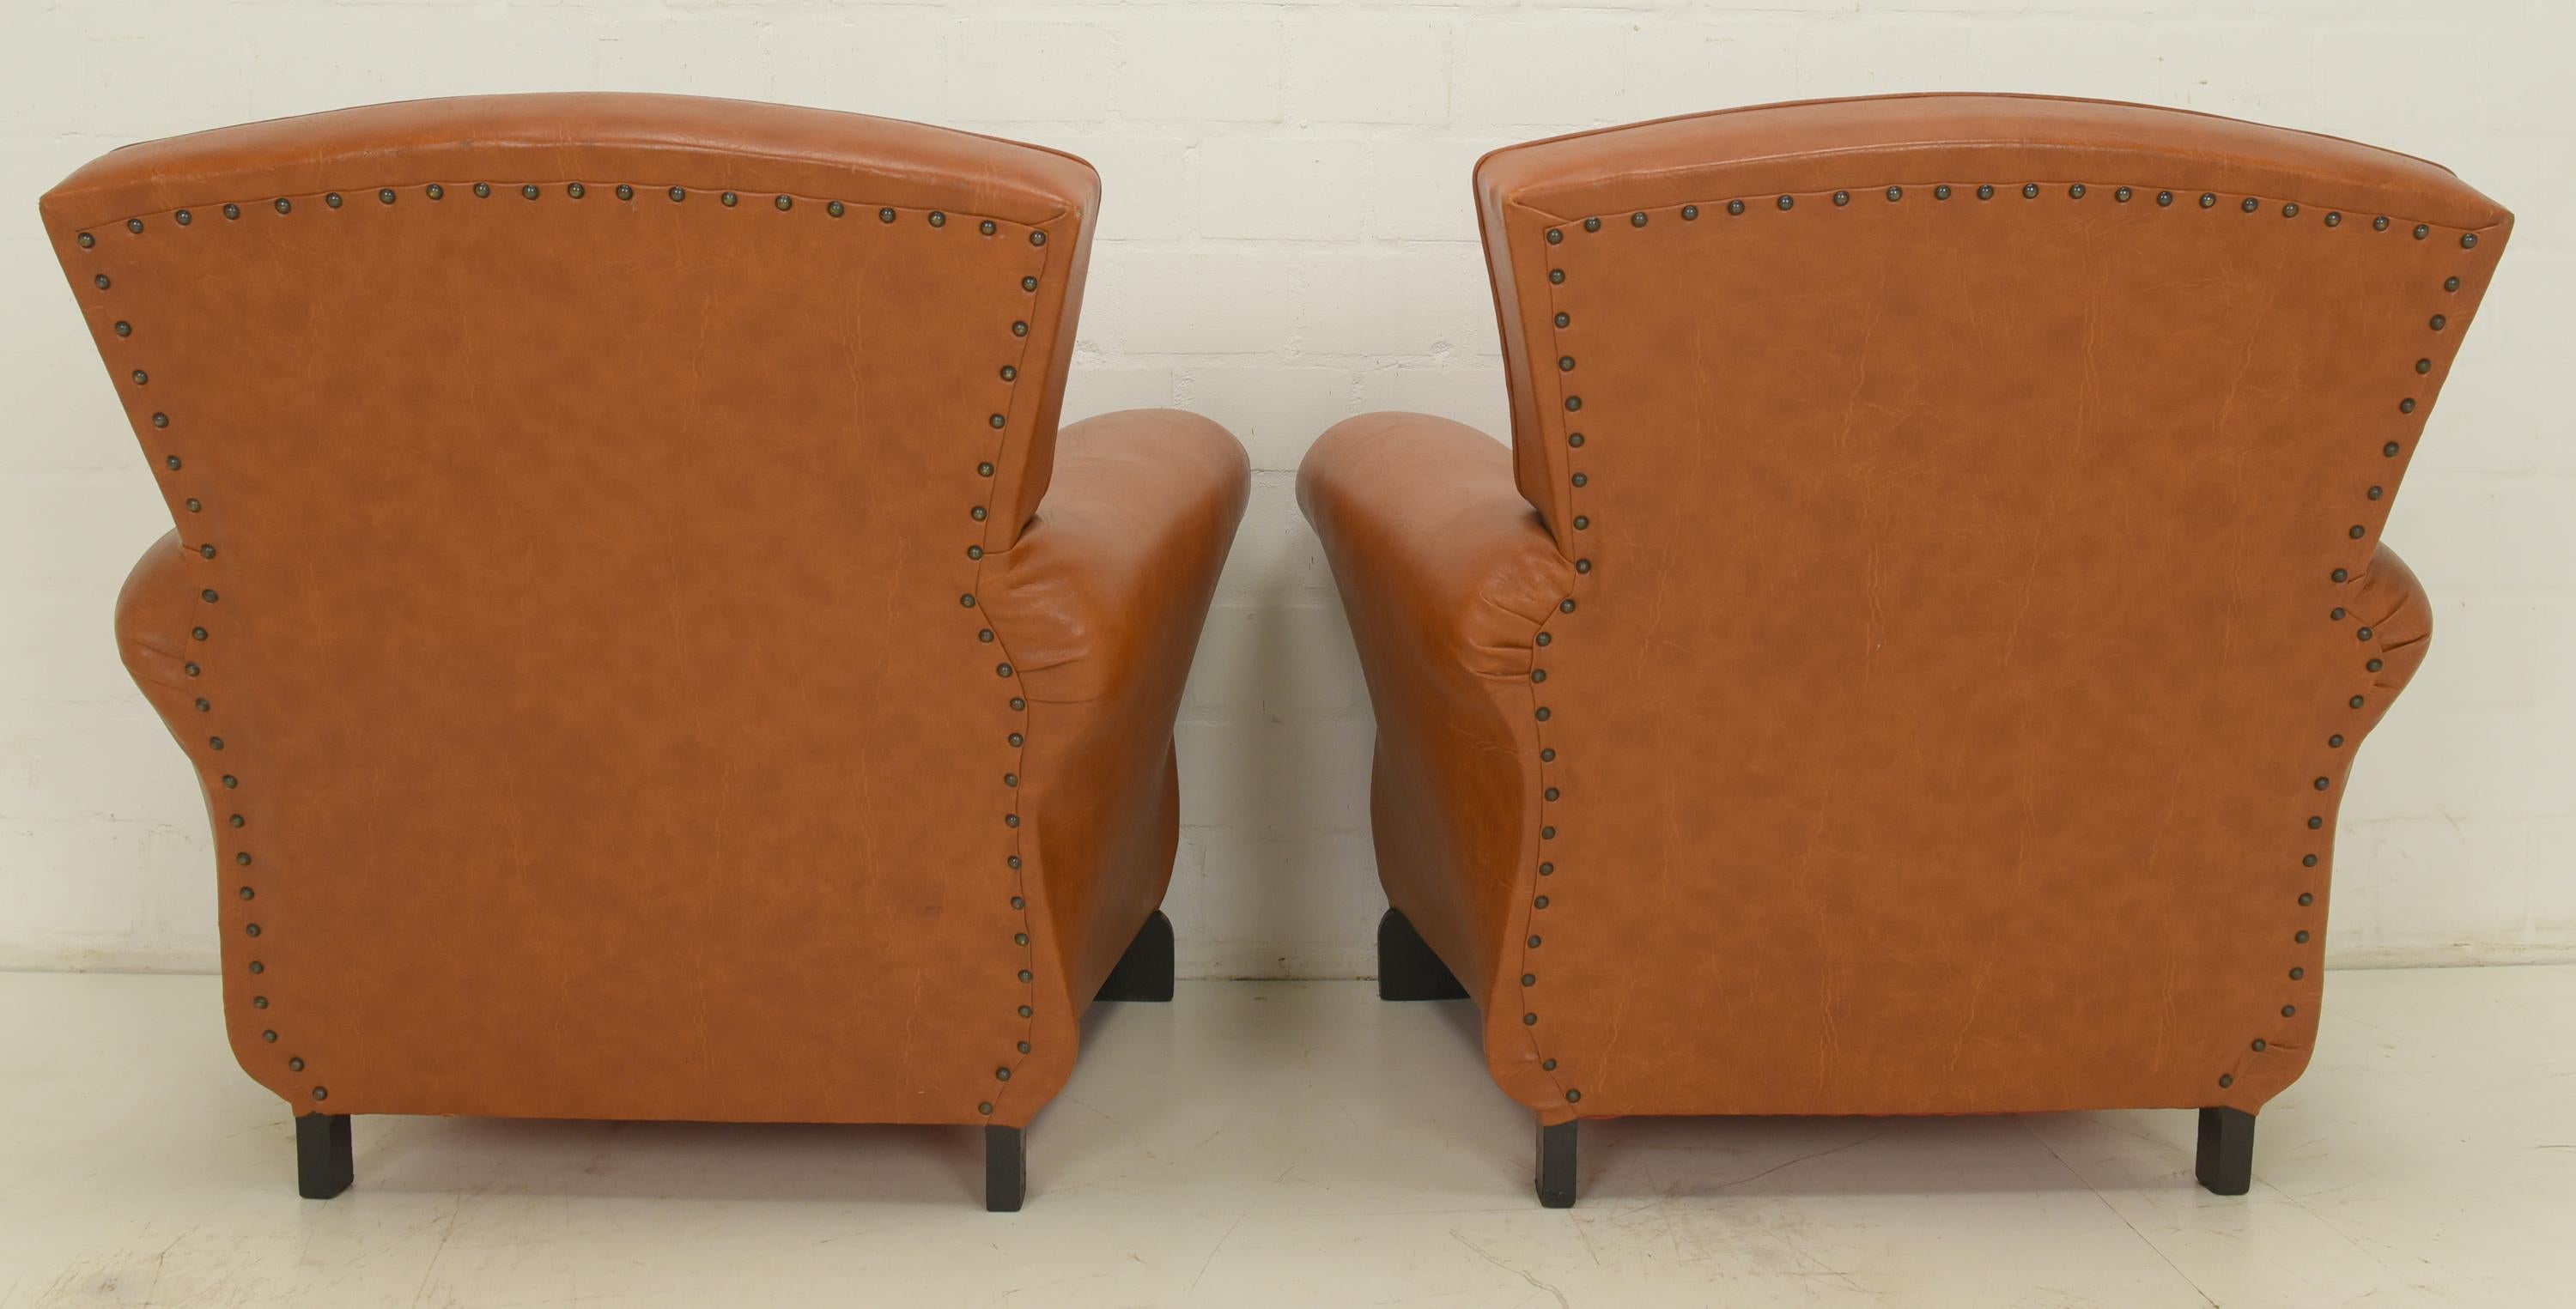 Pair of Art Deco Club Armchairs / Lounge Chairs in Leather, 1940 For Sale 1